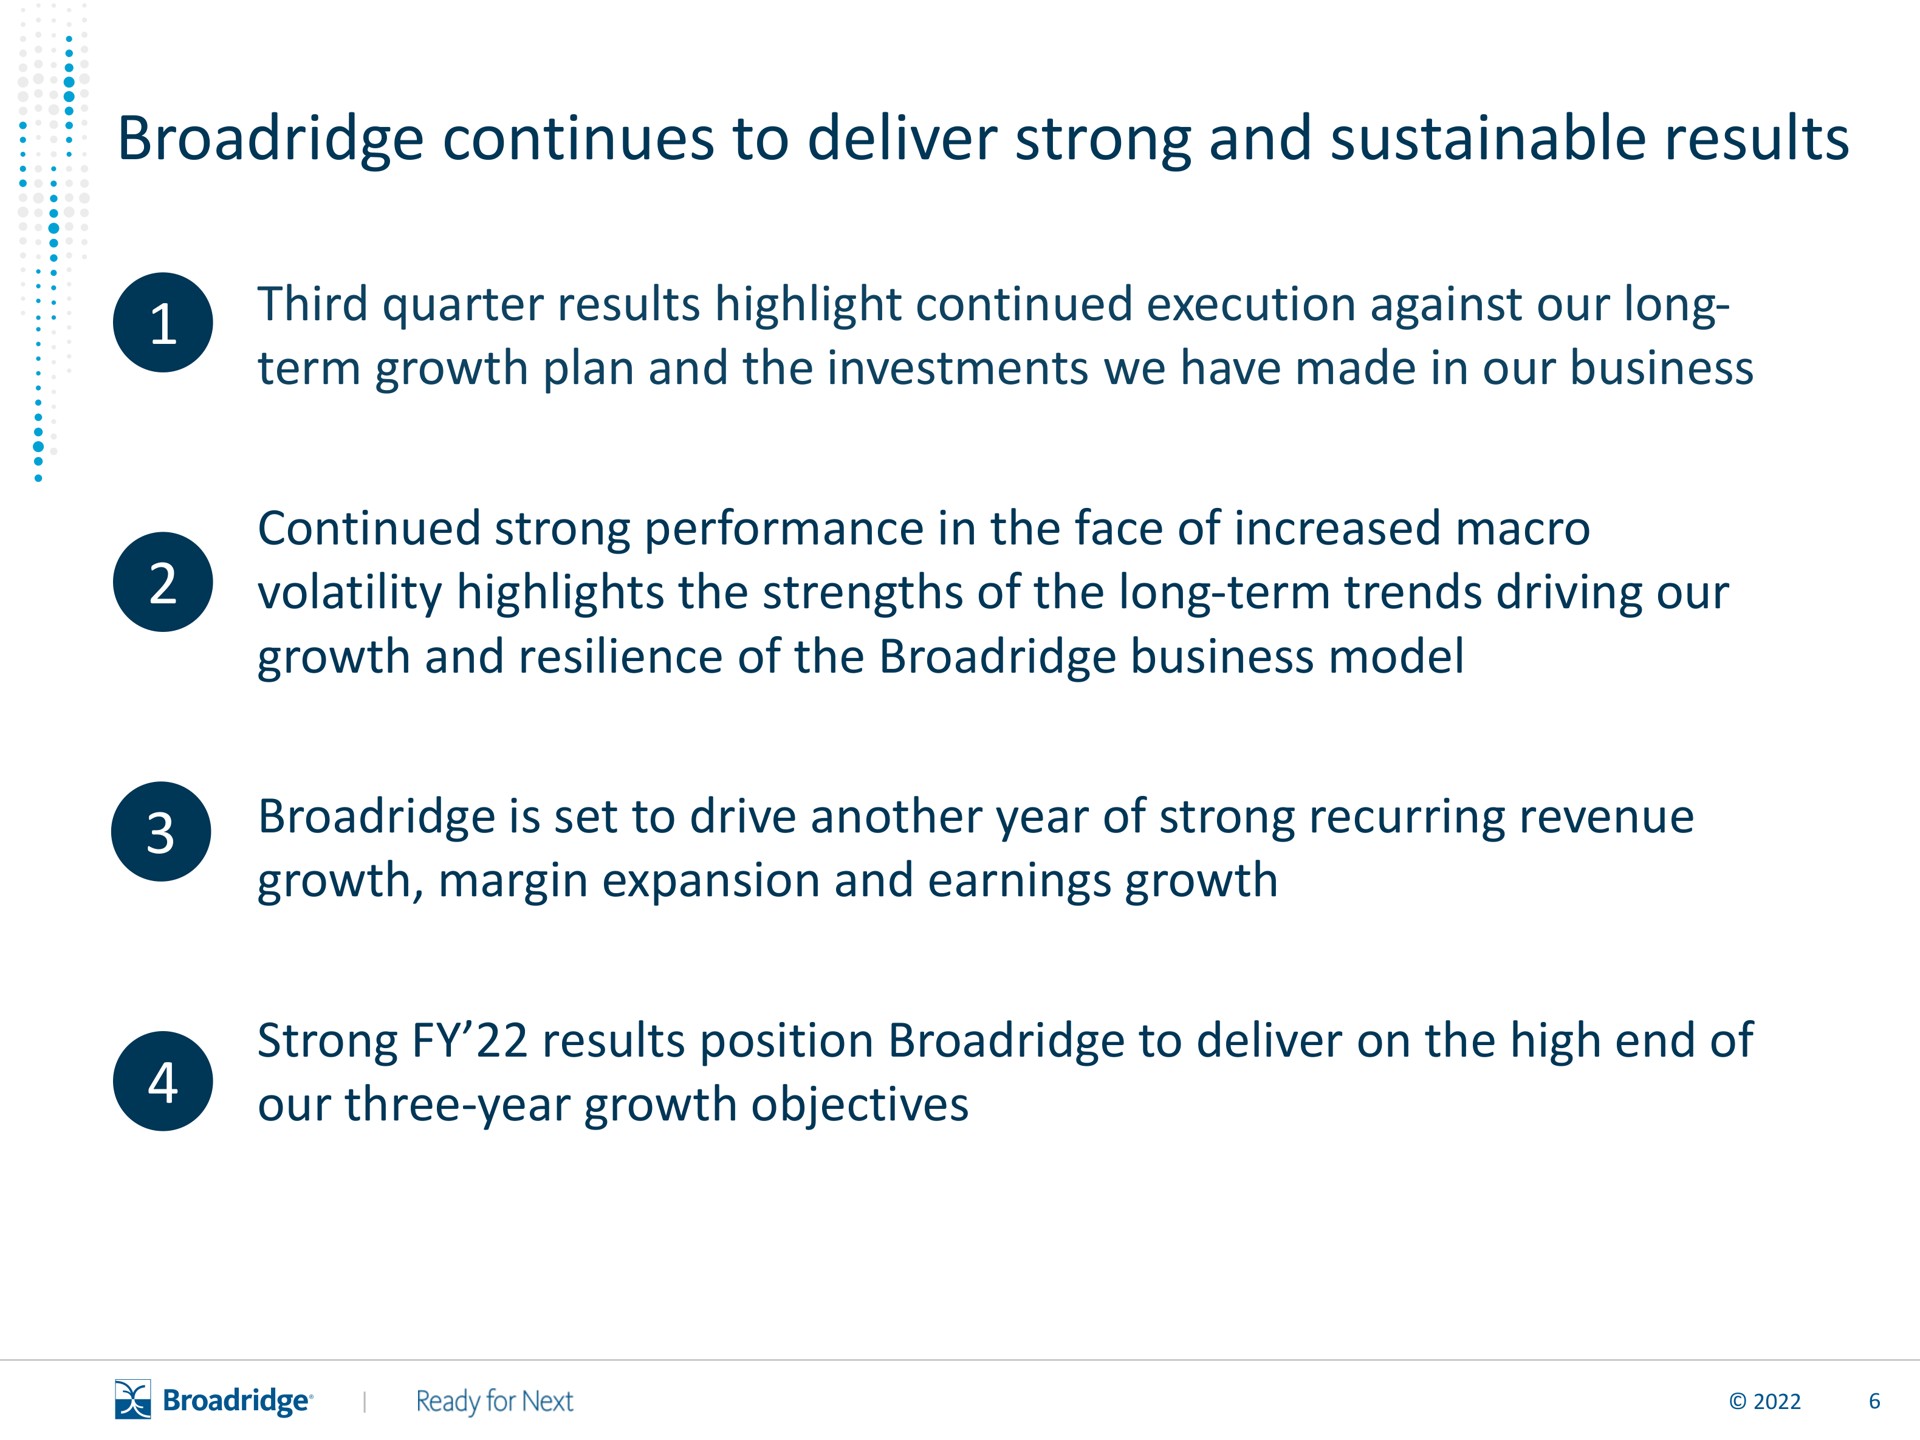 continues to deliver strong and sustainable results third quarter results highlight continued execution against our long term growth plan and the investments we have made in our business continued strong performance in the face of increased macro volatility highlights the strengths of the long term trends driving our growth and resilience of the business model is set to drive another year of strong recurring revenue growth margin expansion and earnings growth strong results position to deliver on the high end of our three year growth objectives | Broadridge Financial Solutions